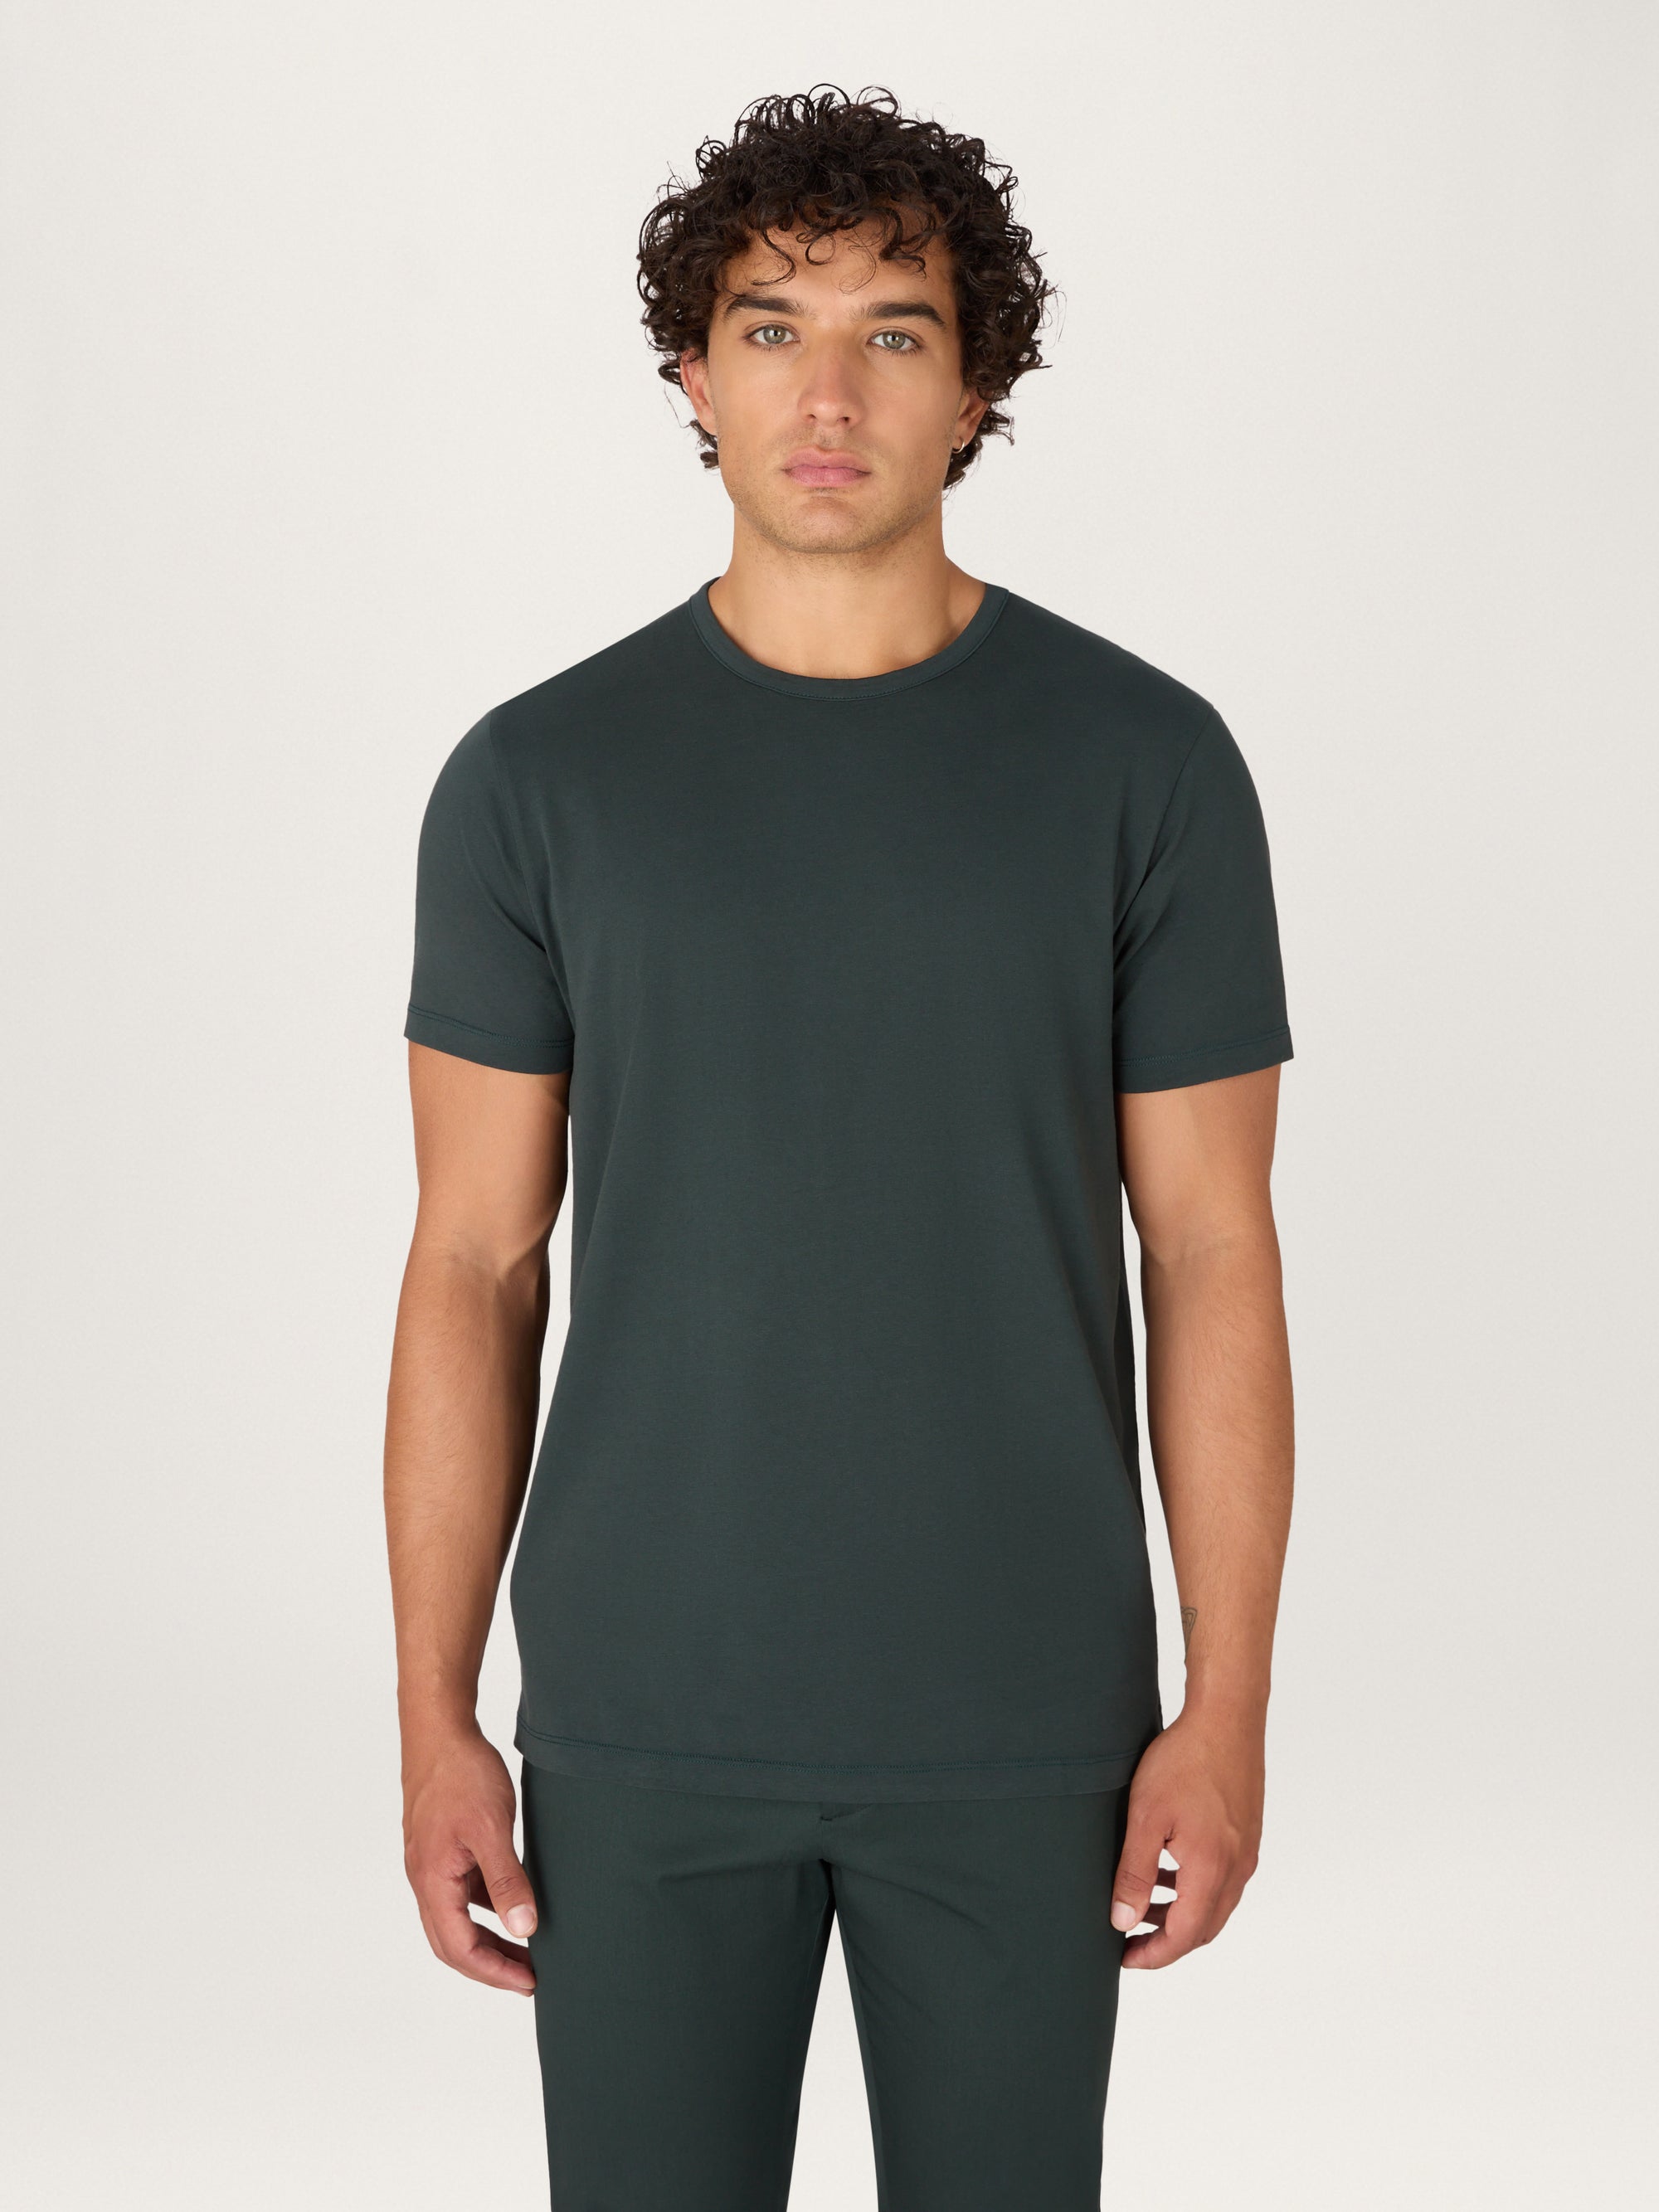 The Classic Tee || Forest Green | Organic Cotton